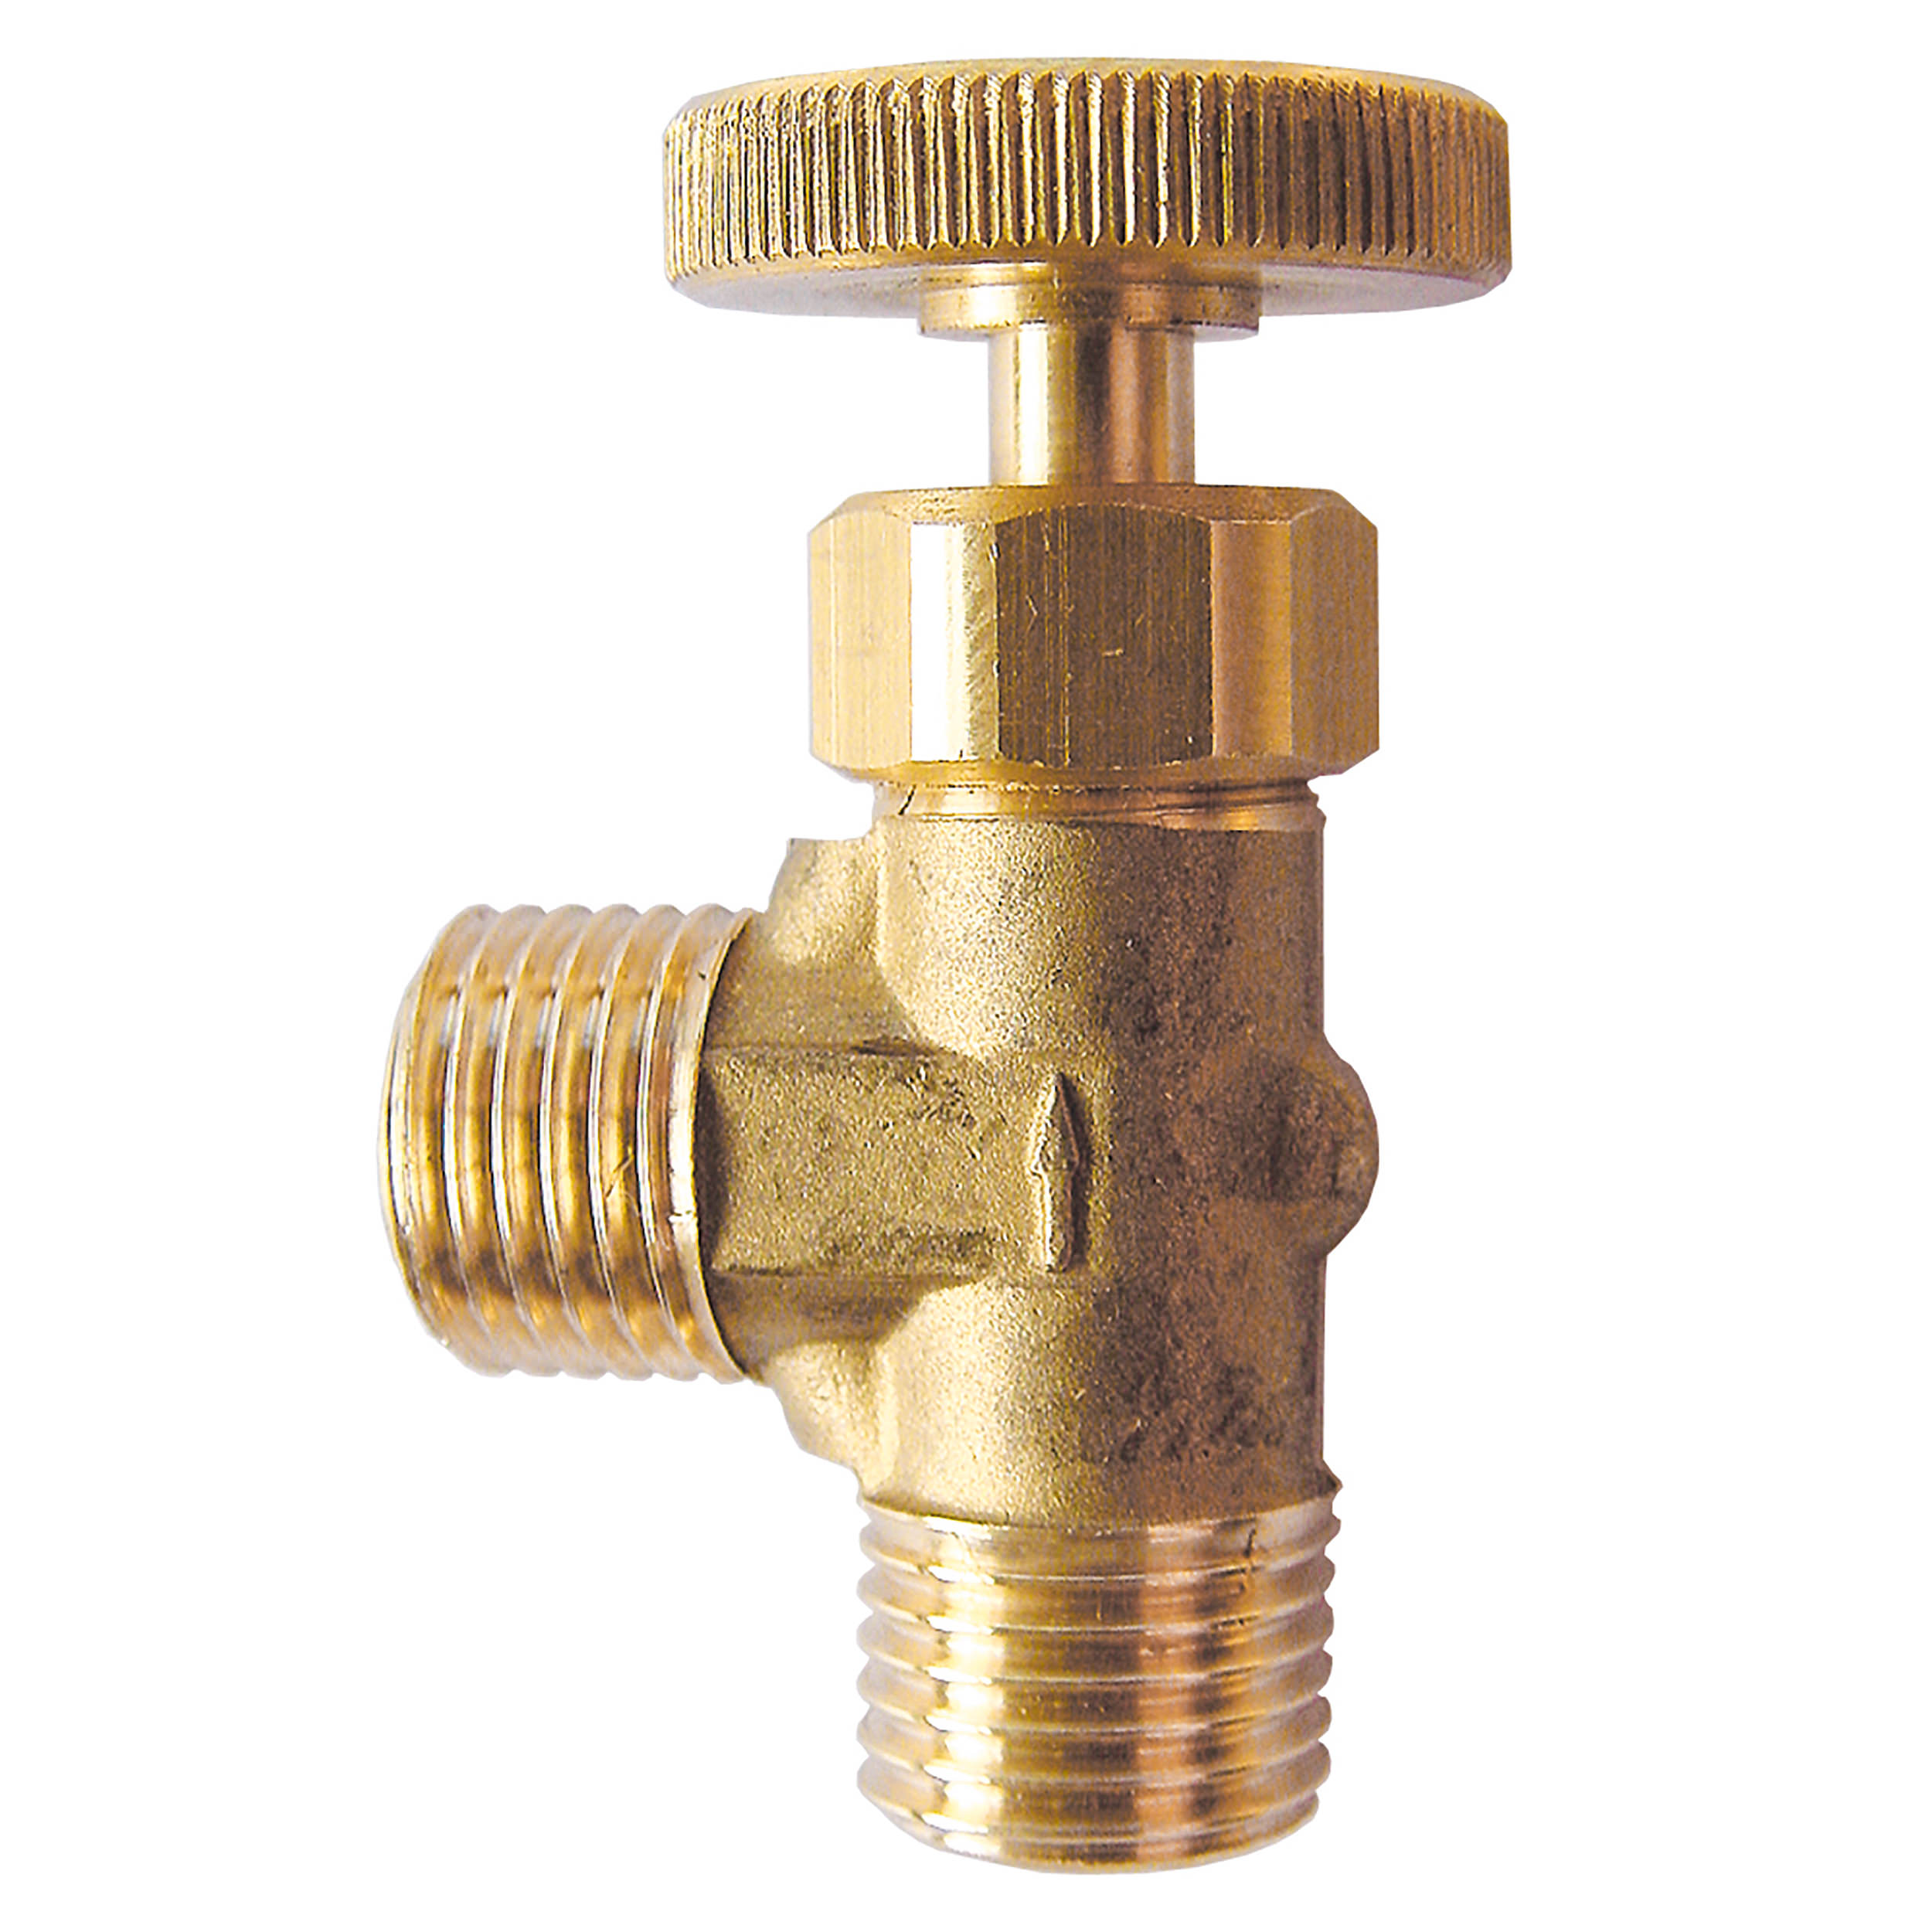 Shut-off valve, 2-way, elbow-type, max. operating pressure 362.5 psi, connection thread: G⅛ male, DN 3.5, l: 34 mm, h: 26 mm